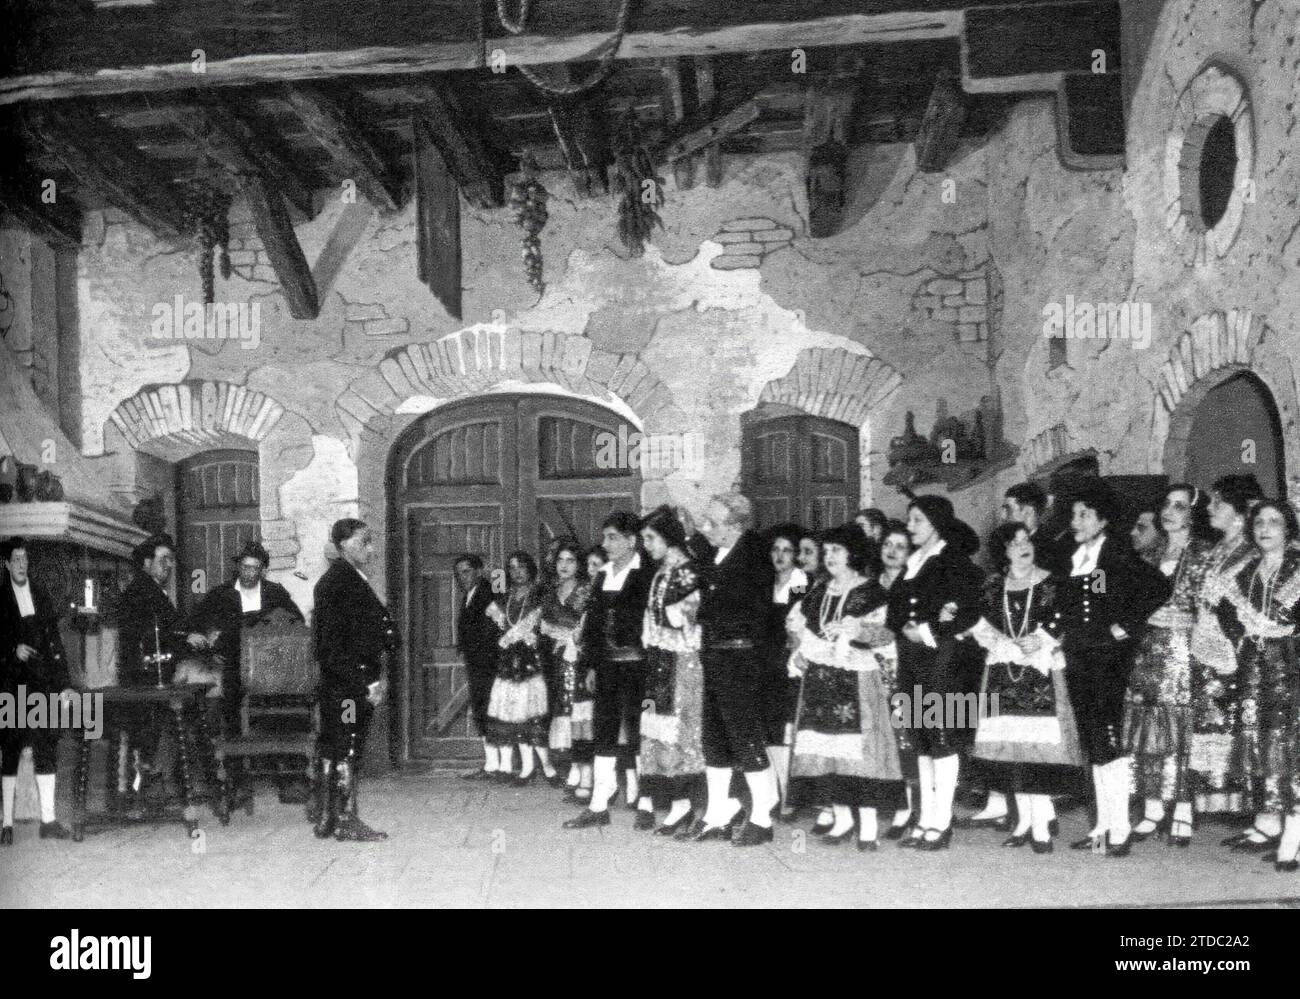 Theatrical performance by Marcos Redondo. 'the song of the Arriero', at the Victoria Theater in Barcelona, year 1930. Credit: Album / Archivo ABC Stock Photo